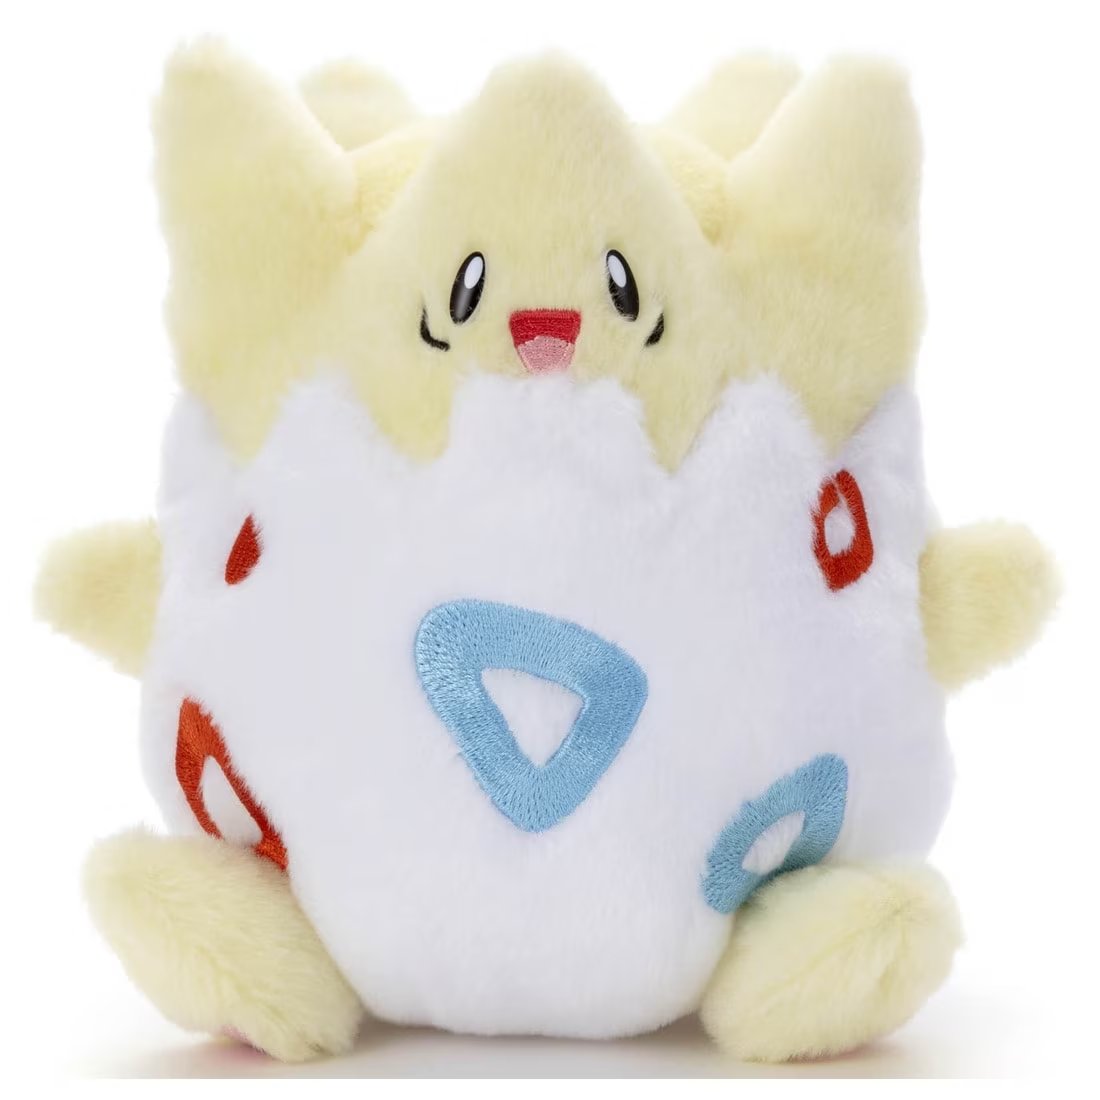 Takara Tomy's Kimi Ni Kimeta (I Choose You) plushie line is adding five new Pokémon! Sylveon, Marill, Togepi, Latios and Latias will all be getting new plushies this July in Japan. Thread below, full coverage here: pokejungle.net/2024/05/30/upc…